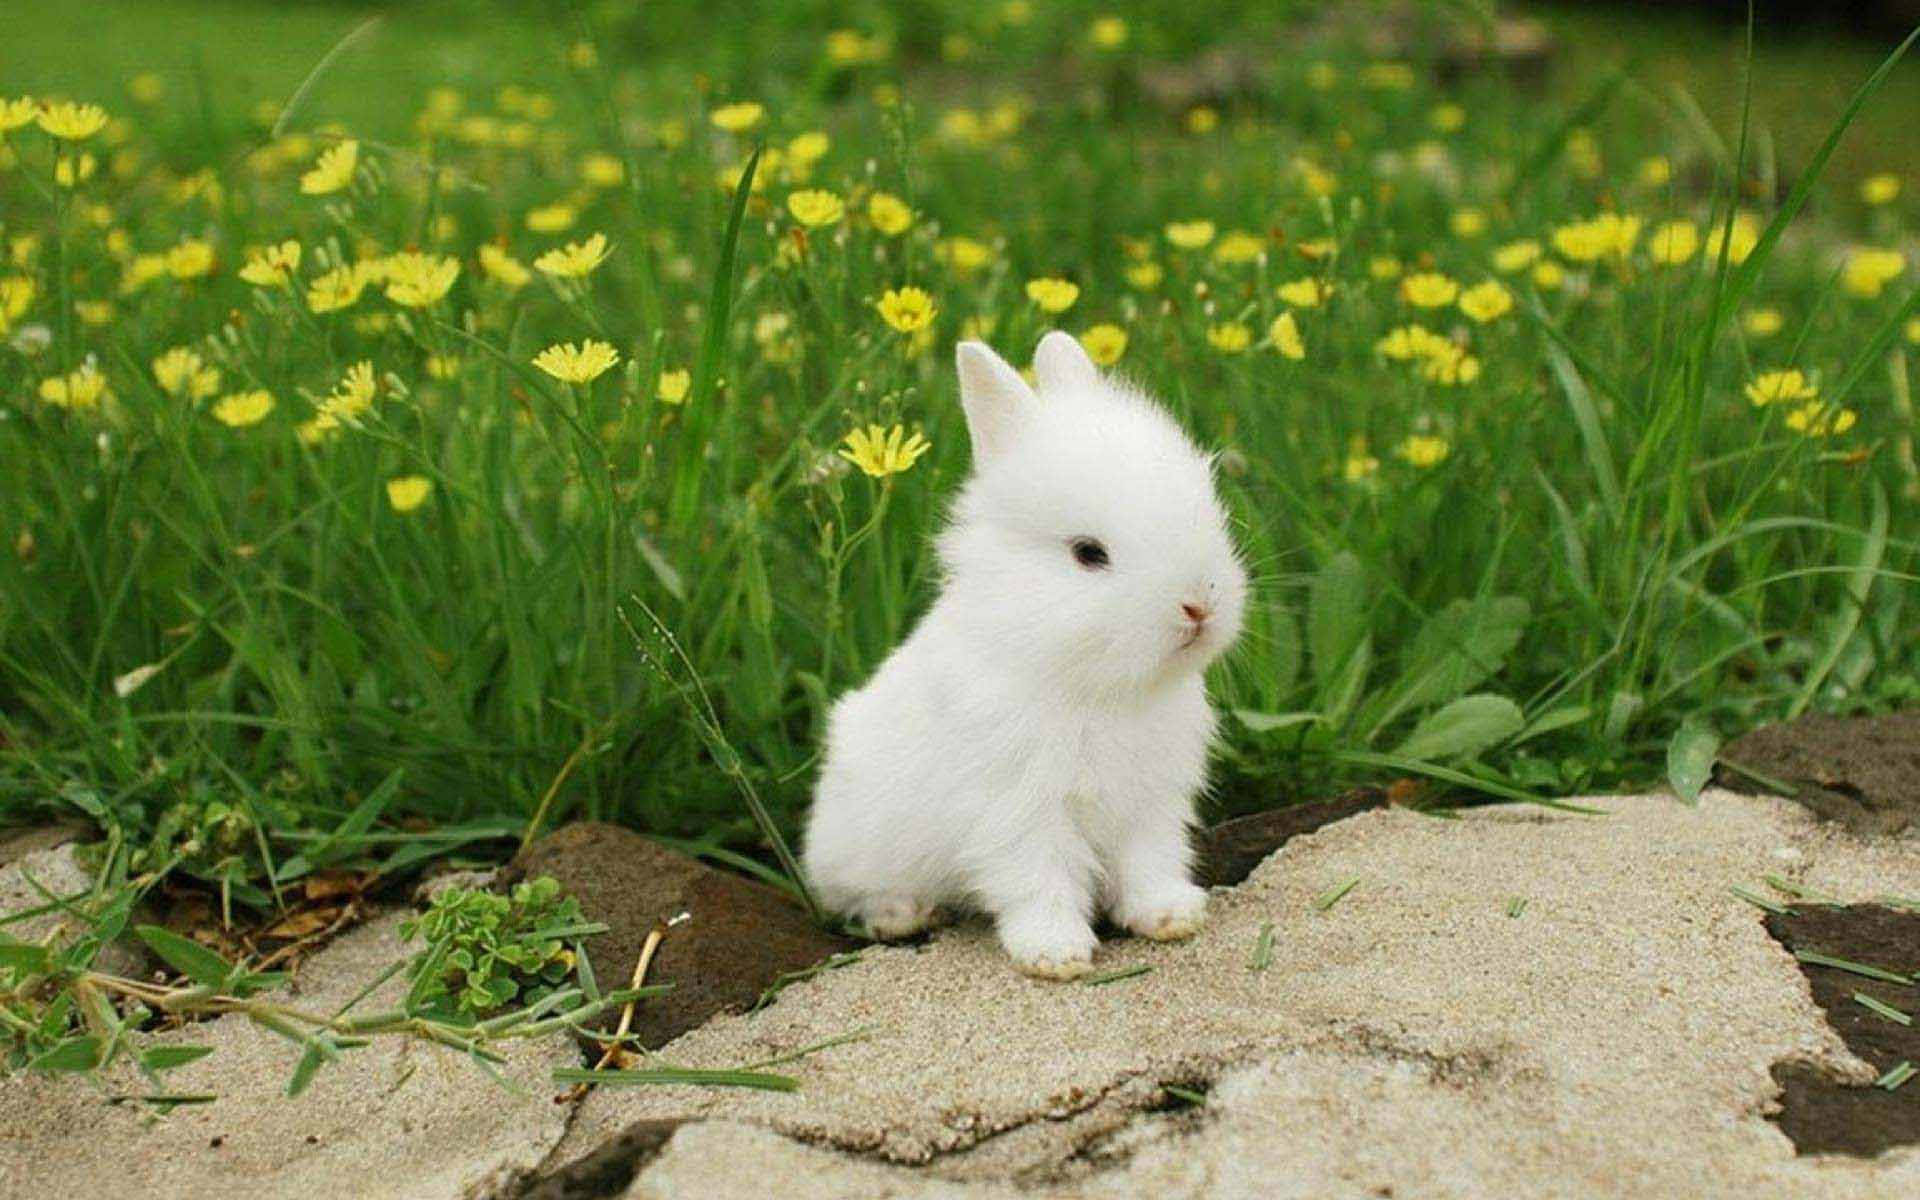 A curious bunny in a lush field